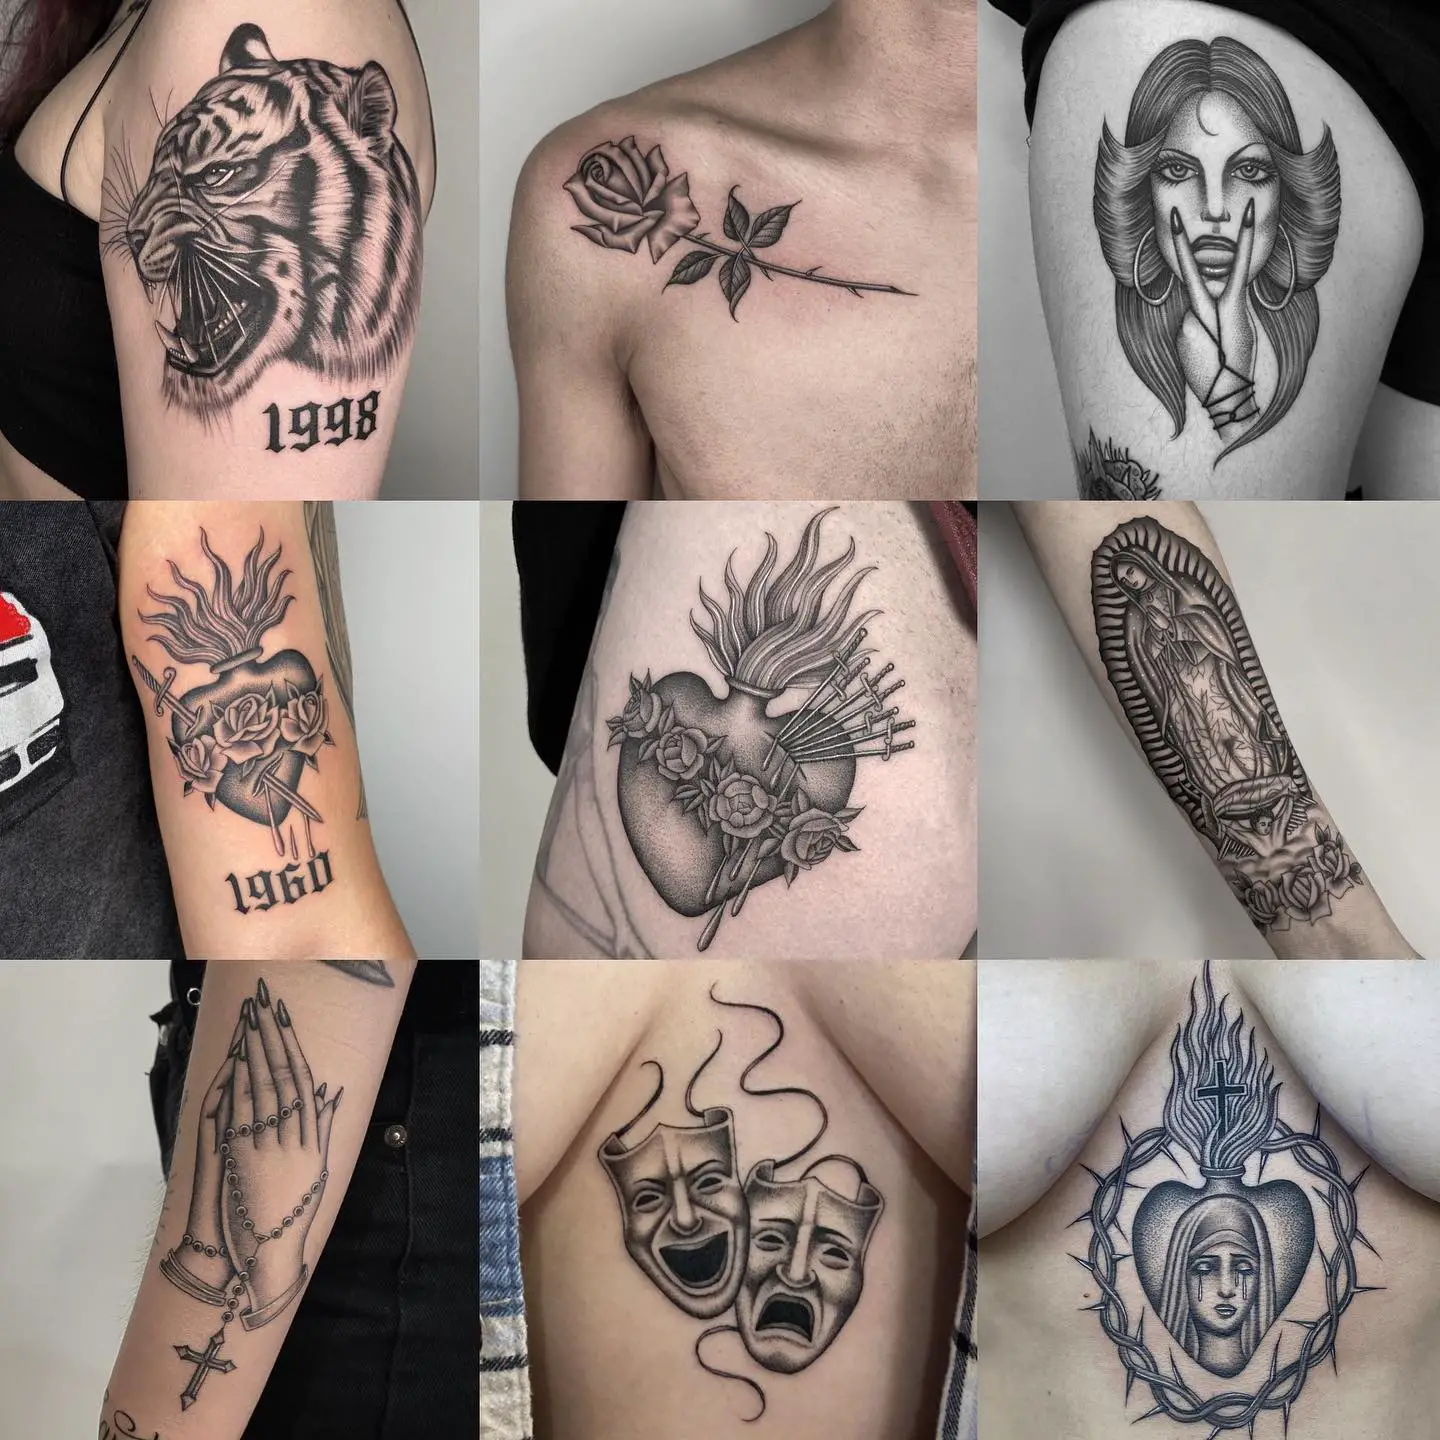 14 Top-Ranking Tattoo Shops In Illinois With Masterful Artists - Psycho Tats